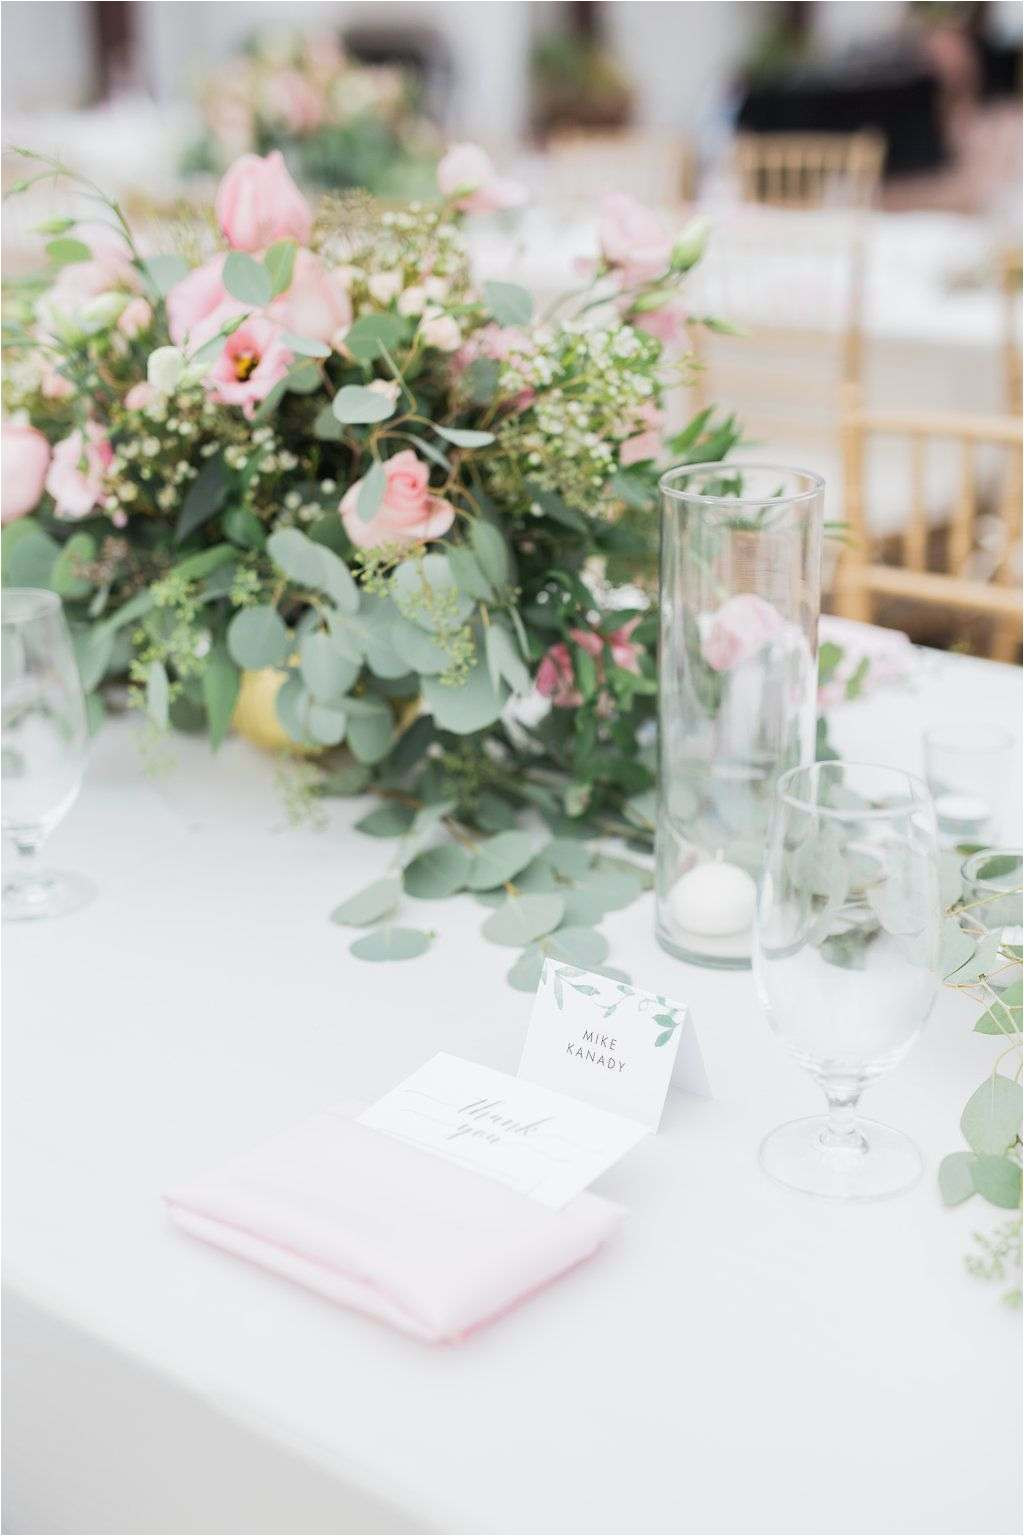 23 Awesome Wedding Vase Rentals 2024 free download wedding vase rentals of 29 style of wedding decor rentals idea best wedding bridal throughout amazing signature party rentals wedding inspiration party planning outdoor party tablescape simp